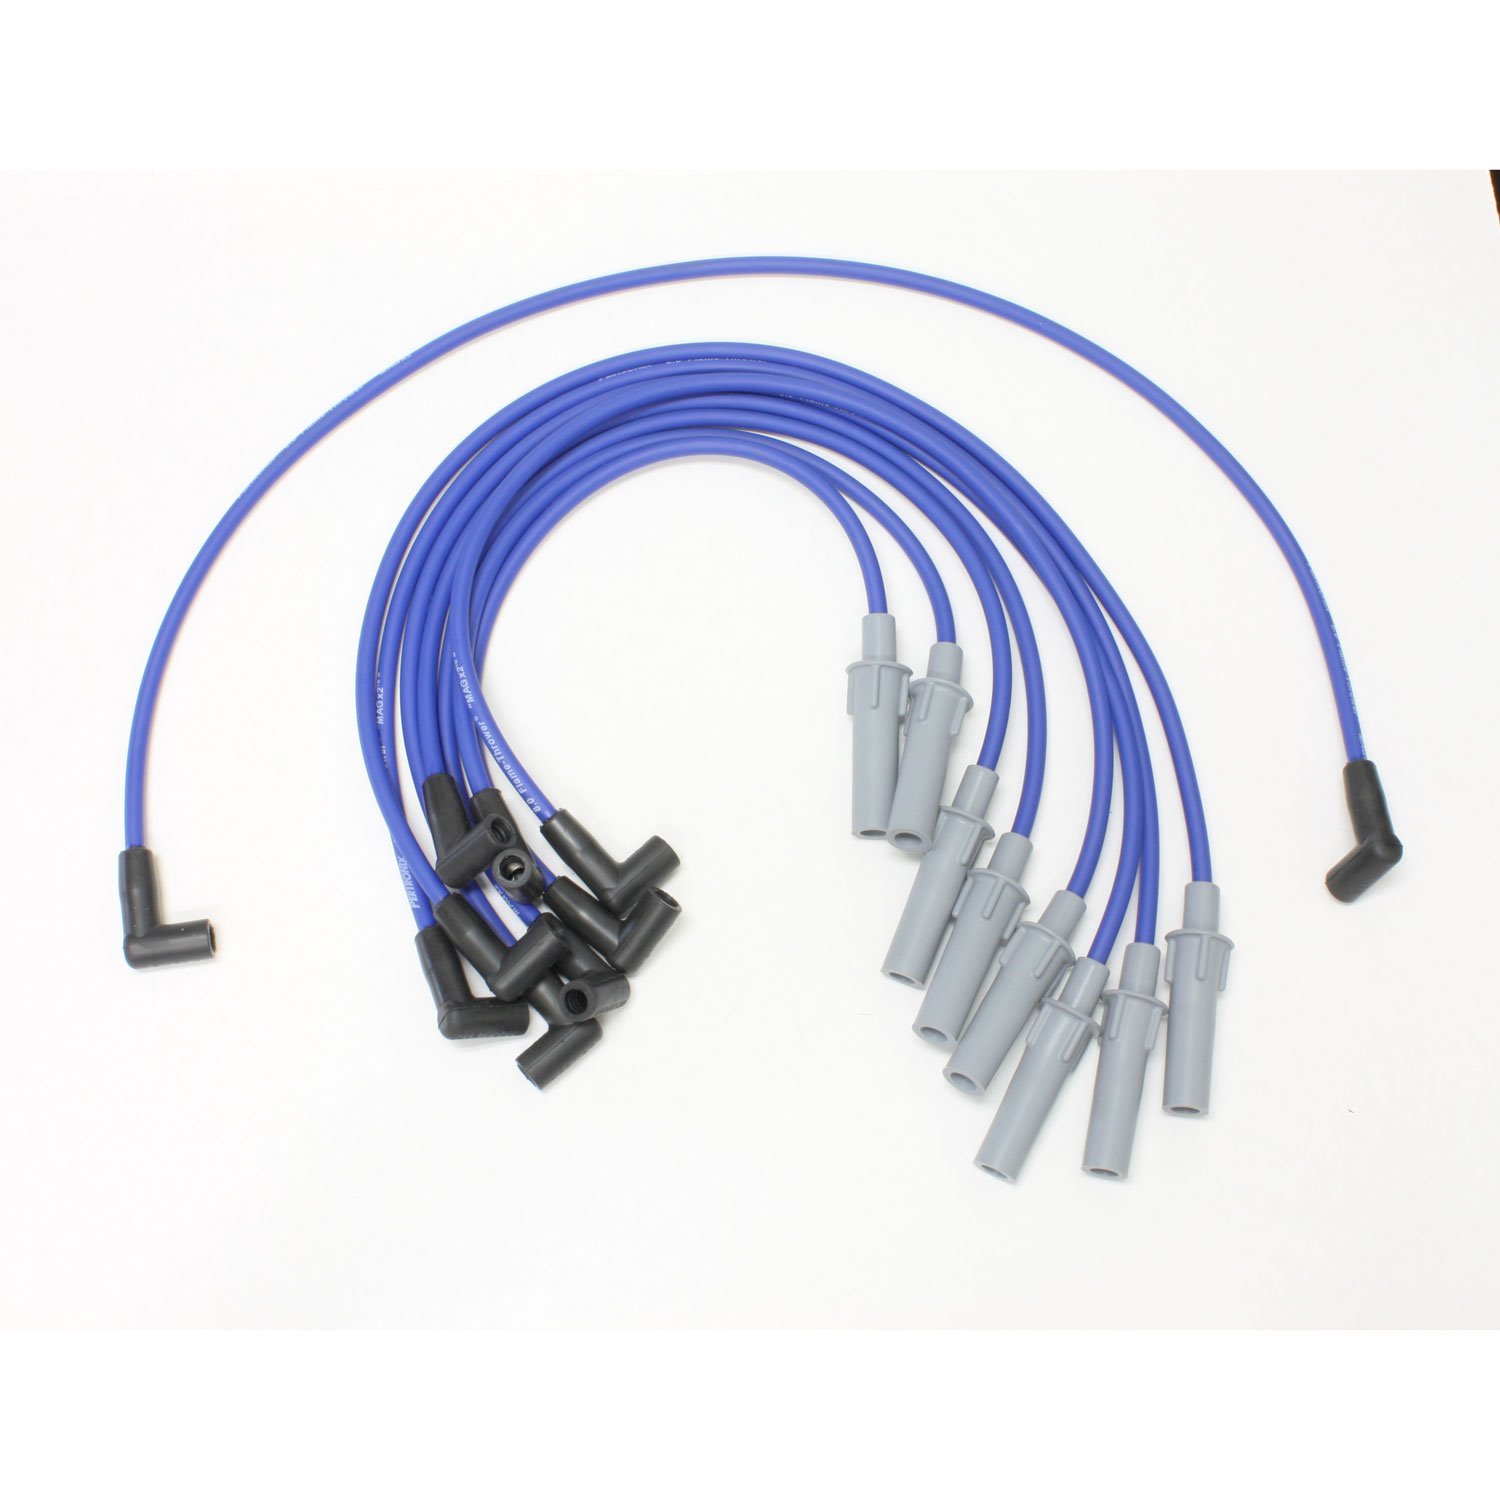 PerTronix 808332 Flame-Thrower Spark Plug Wires 8 cyl Dodge Custom Fit Blue